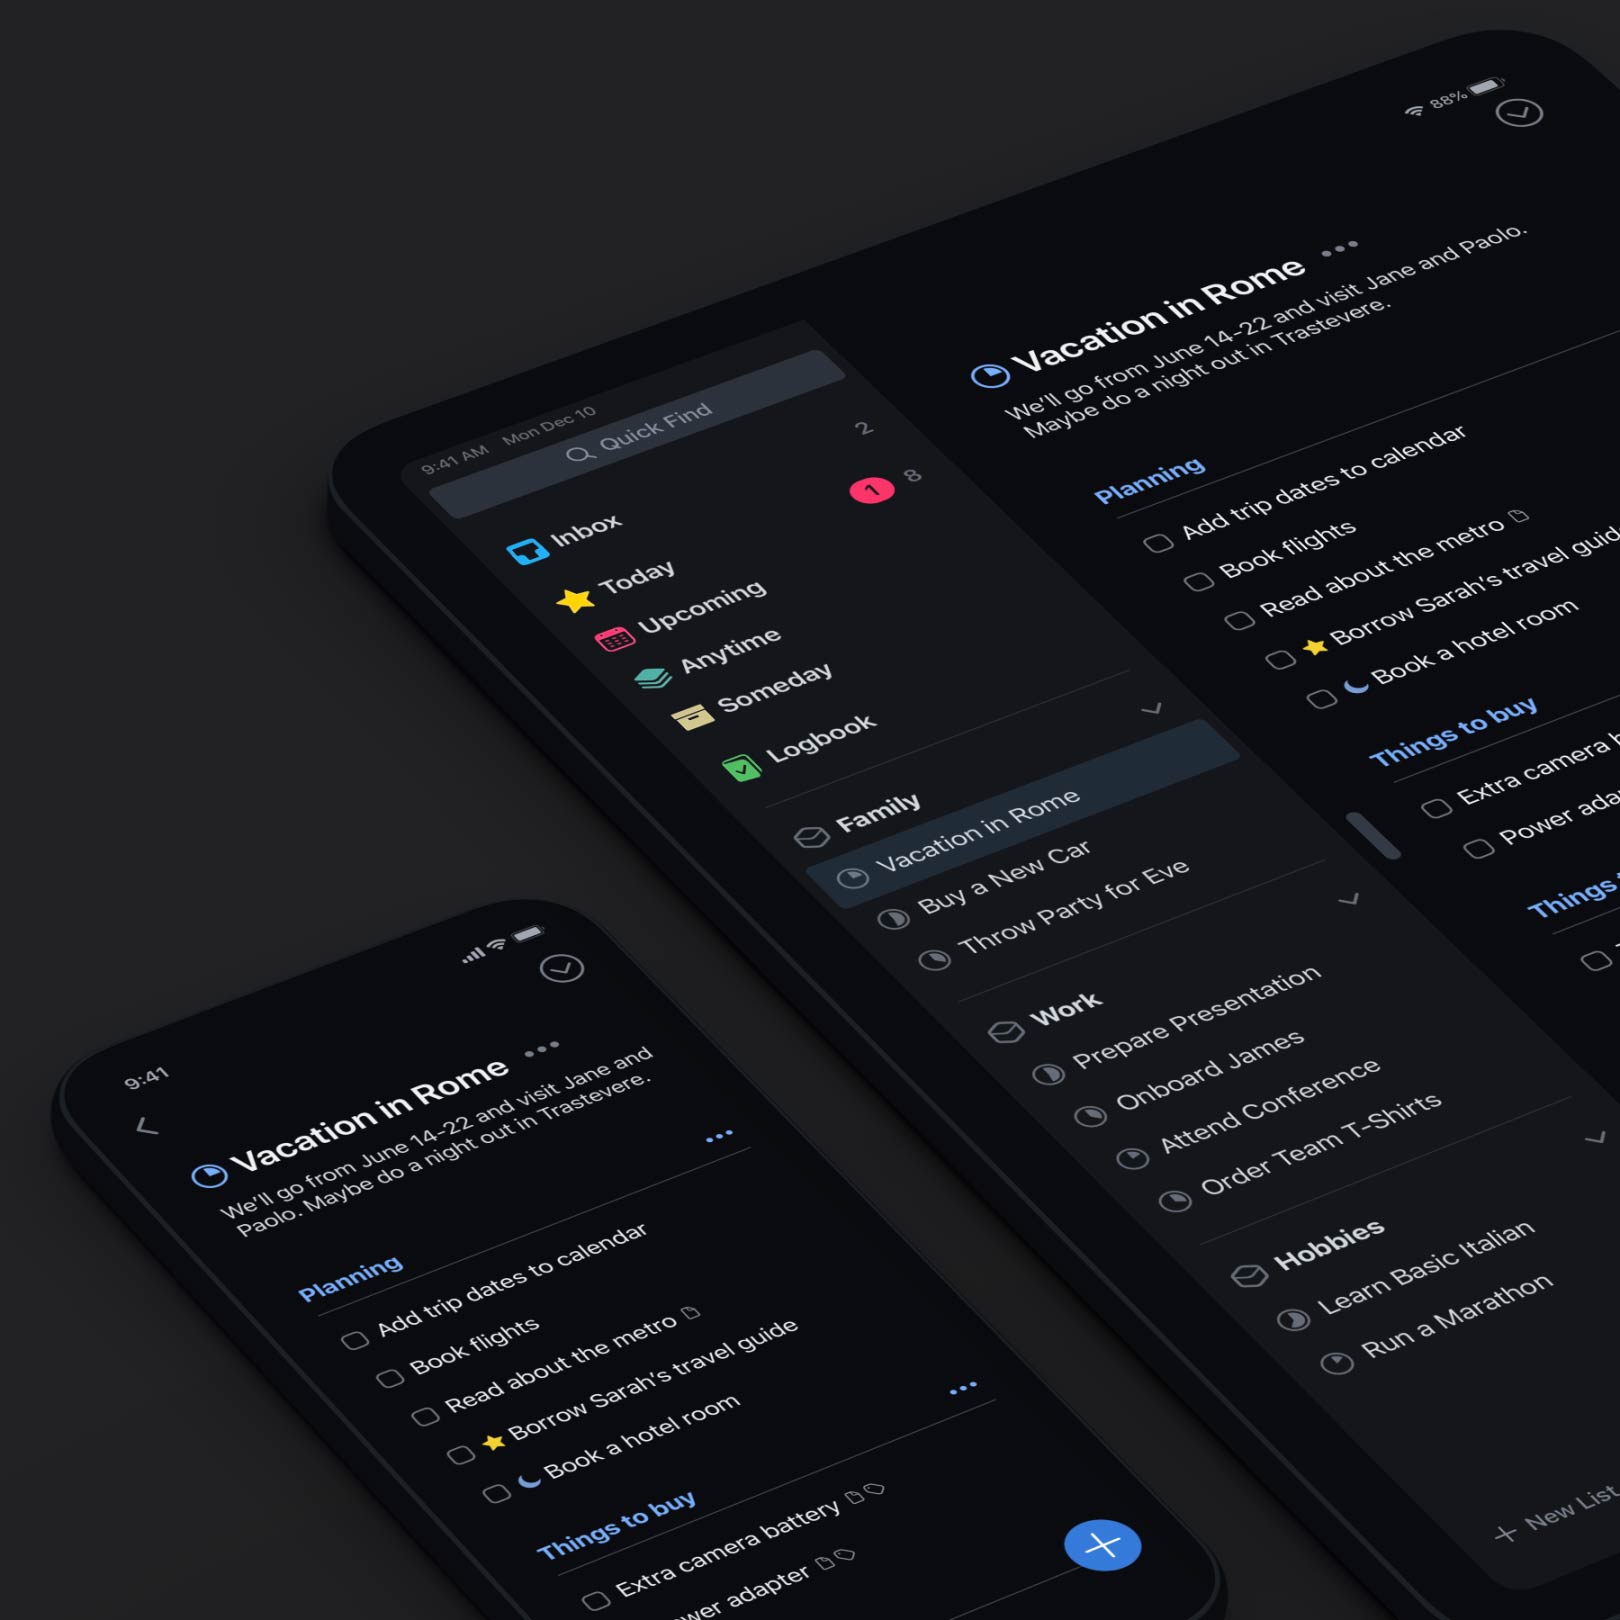 Things for iOS: Black Appearance